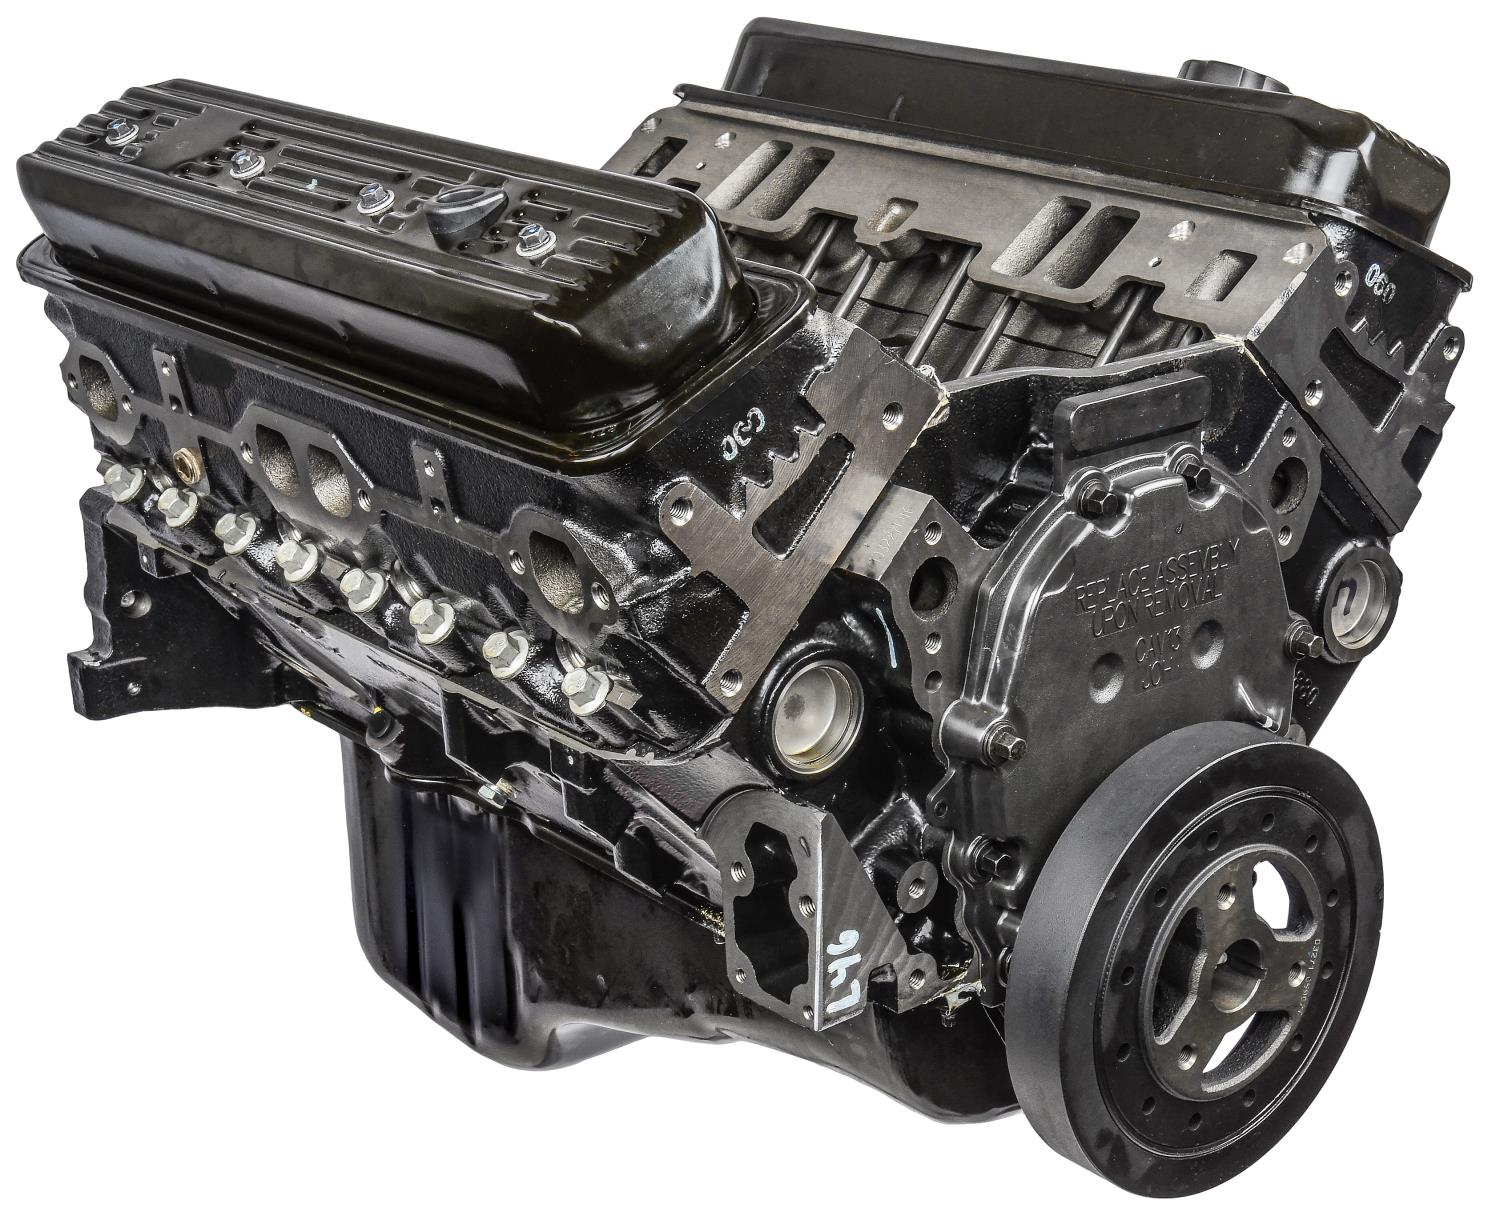 GM Replacement Small Block Chevy Crate Engine [1996-2002 L31 LD Vortec 350 ci/5.7L V8]